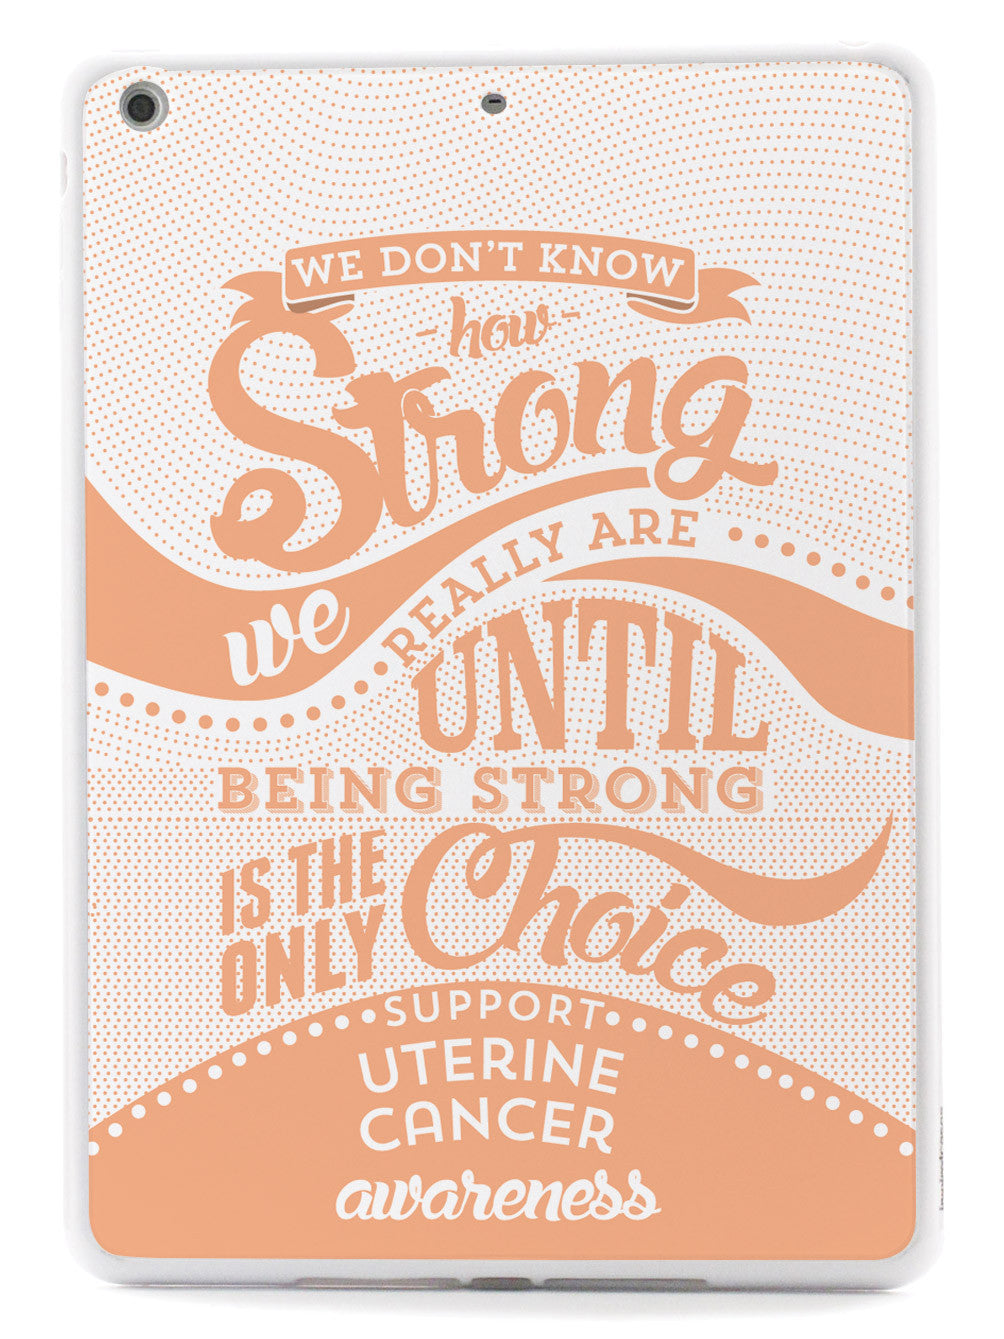 How Strong - Uterine Cancer Awareness Case